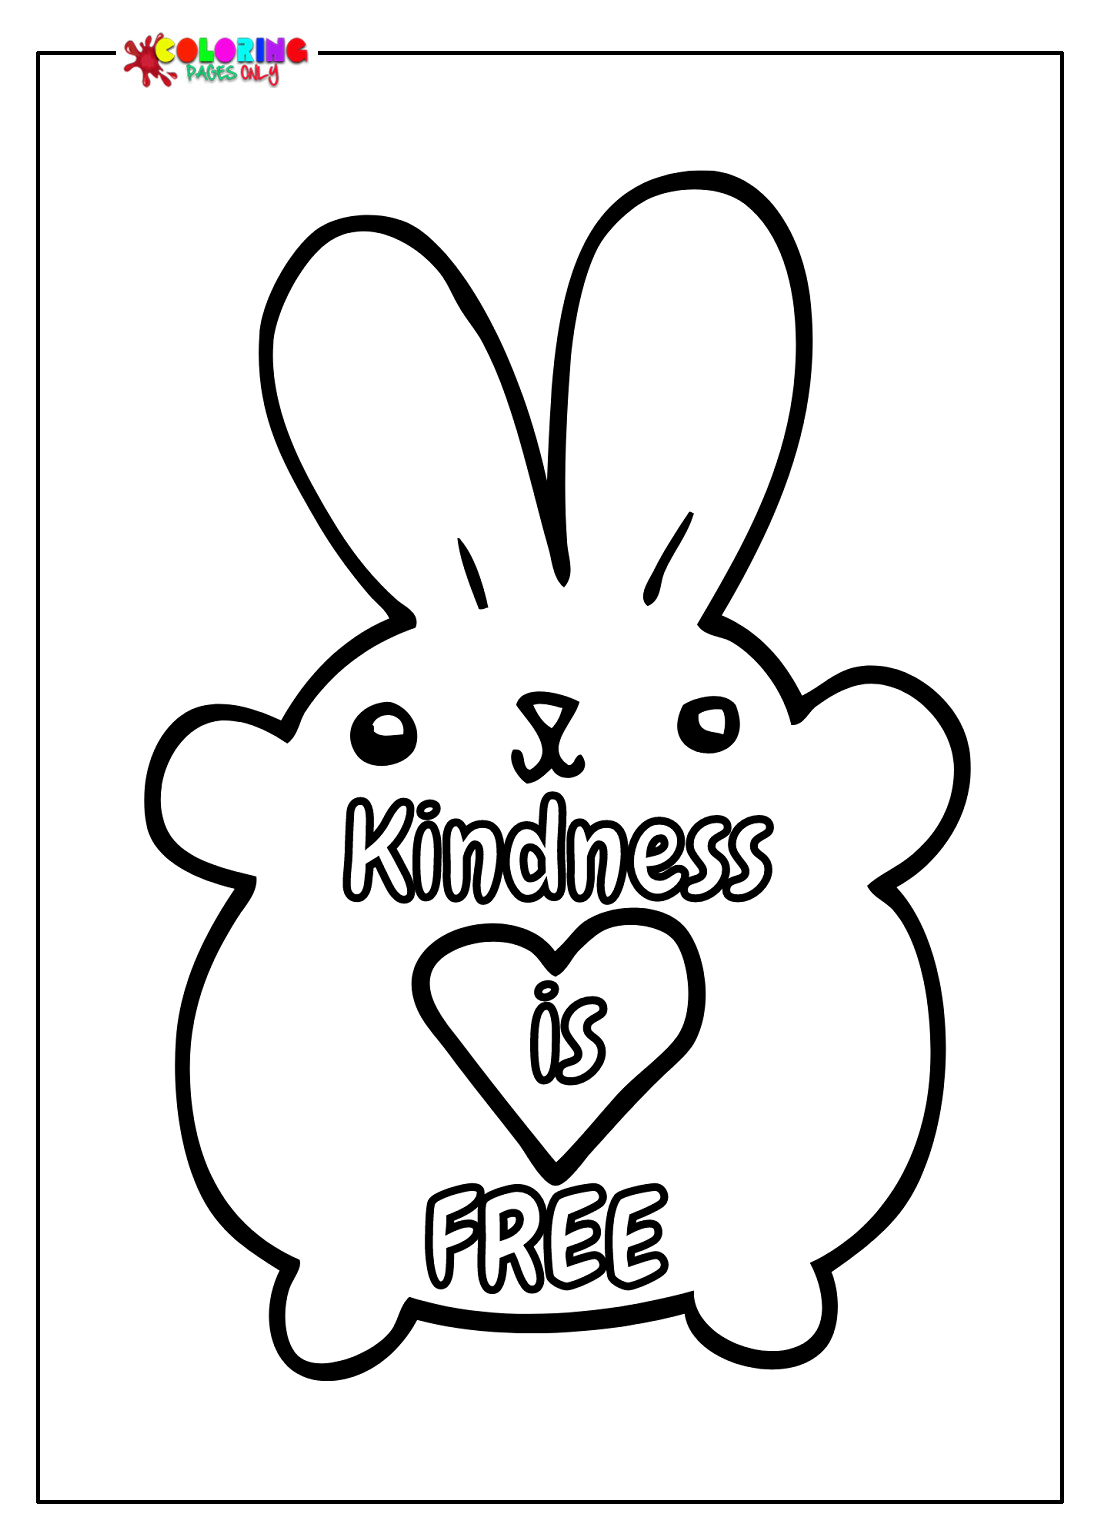 Kindness is Free Coloring Page